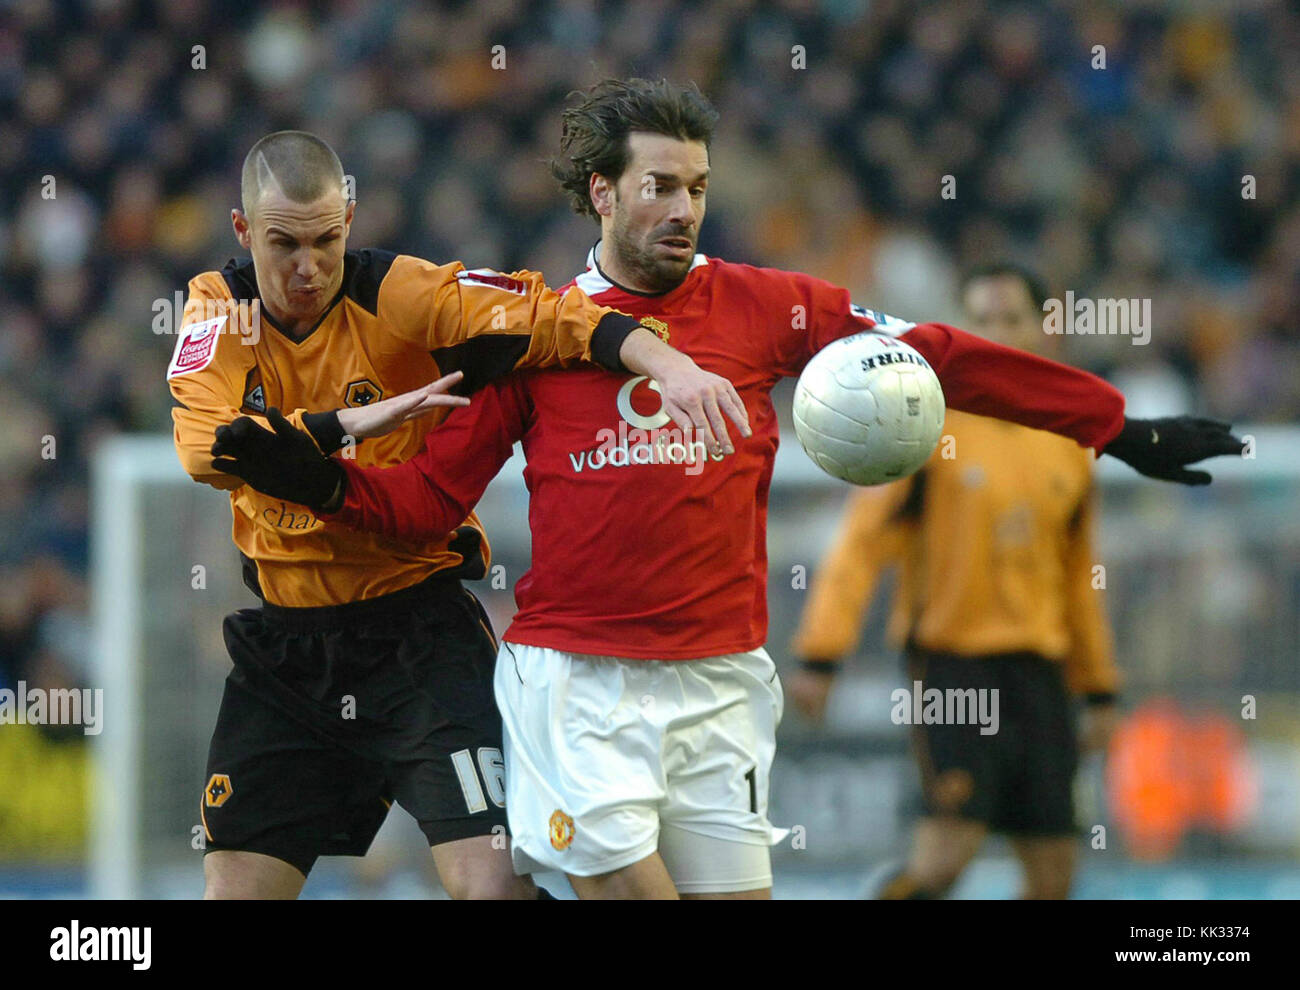 Footballer Ruud Van Nistelrooy and Kenny Miller Wolverhampton Wanderers v Manchester United 29 January 2006 Stock Photo